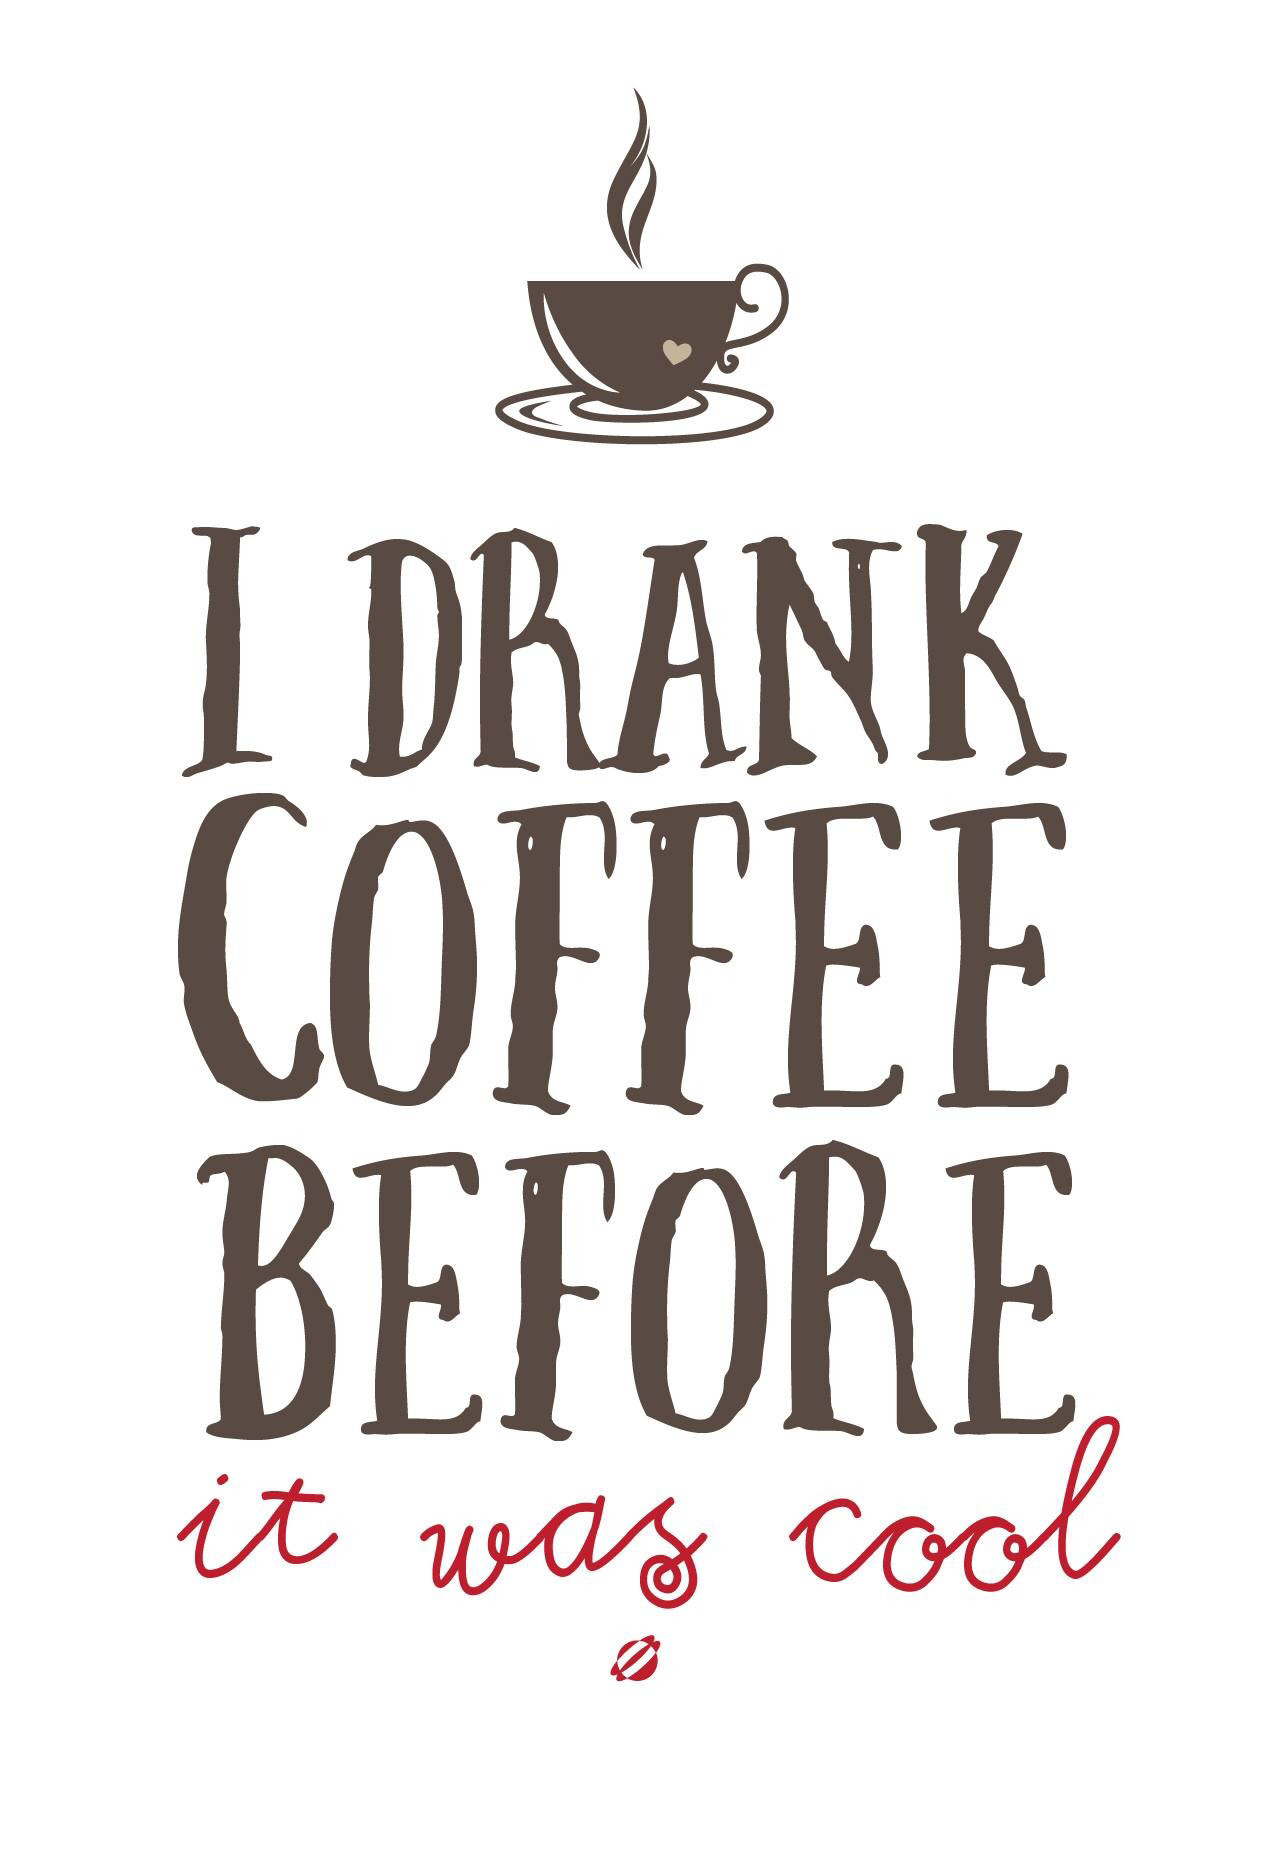 Funny Quotes About Coffee
 Funny Quotes About Drinking Coffee QuotesGram